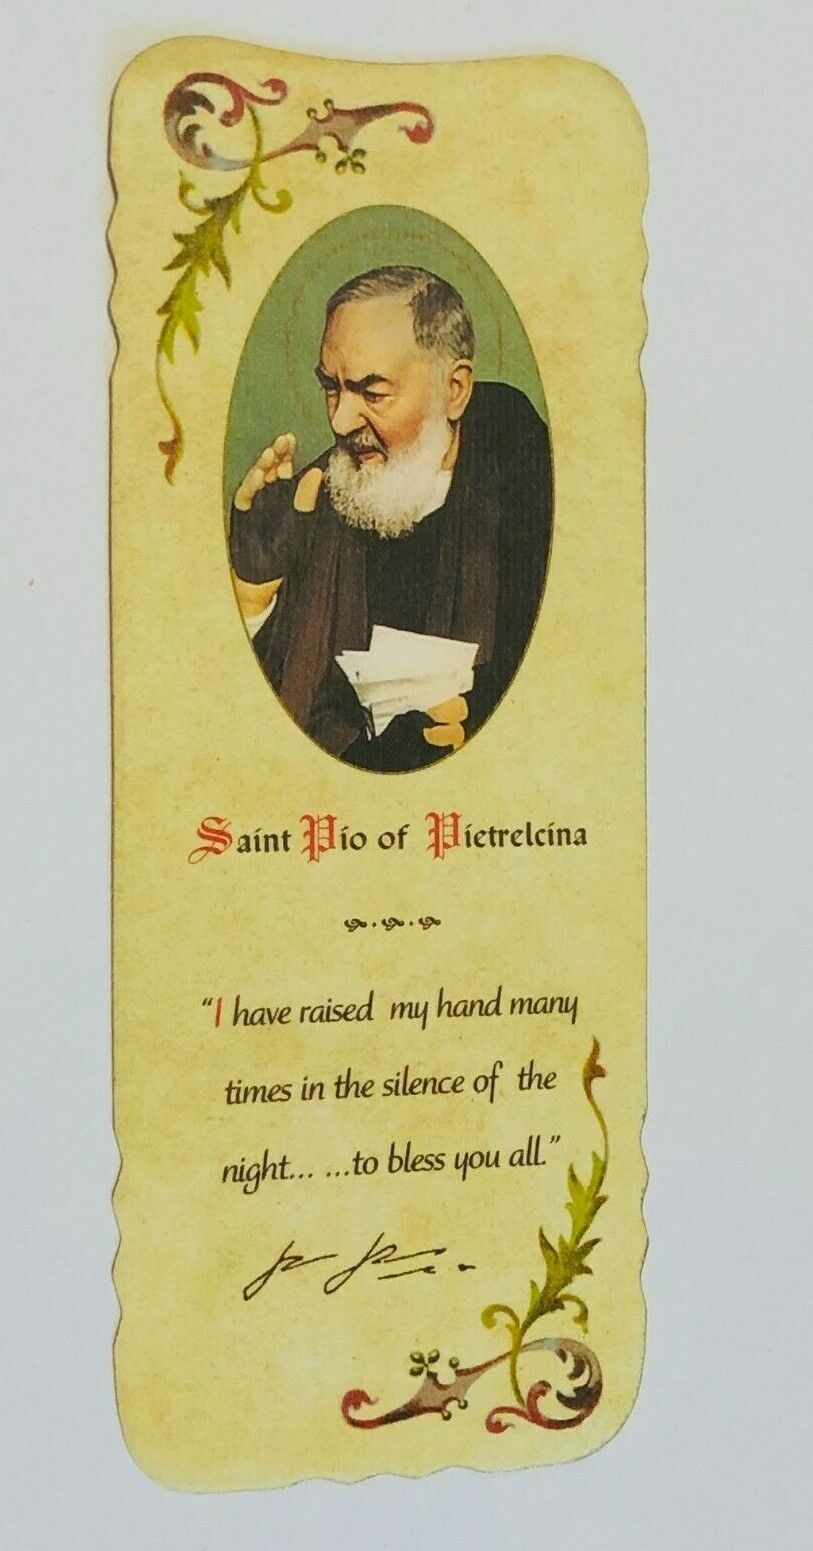 Padre Pio Prayer Card to Obtain Graces Bookmark Size, New From Italy - Bob and Penny Lord